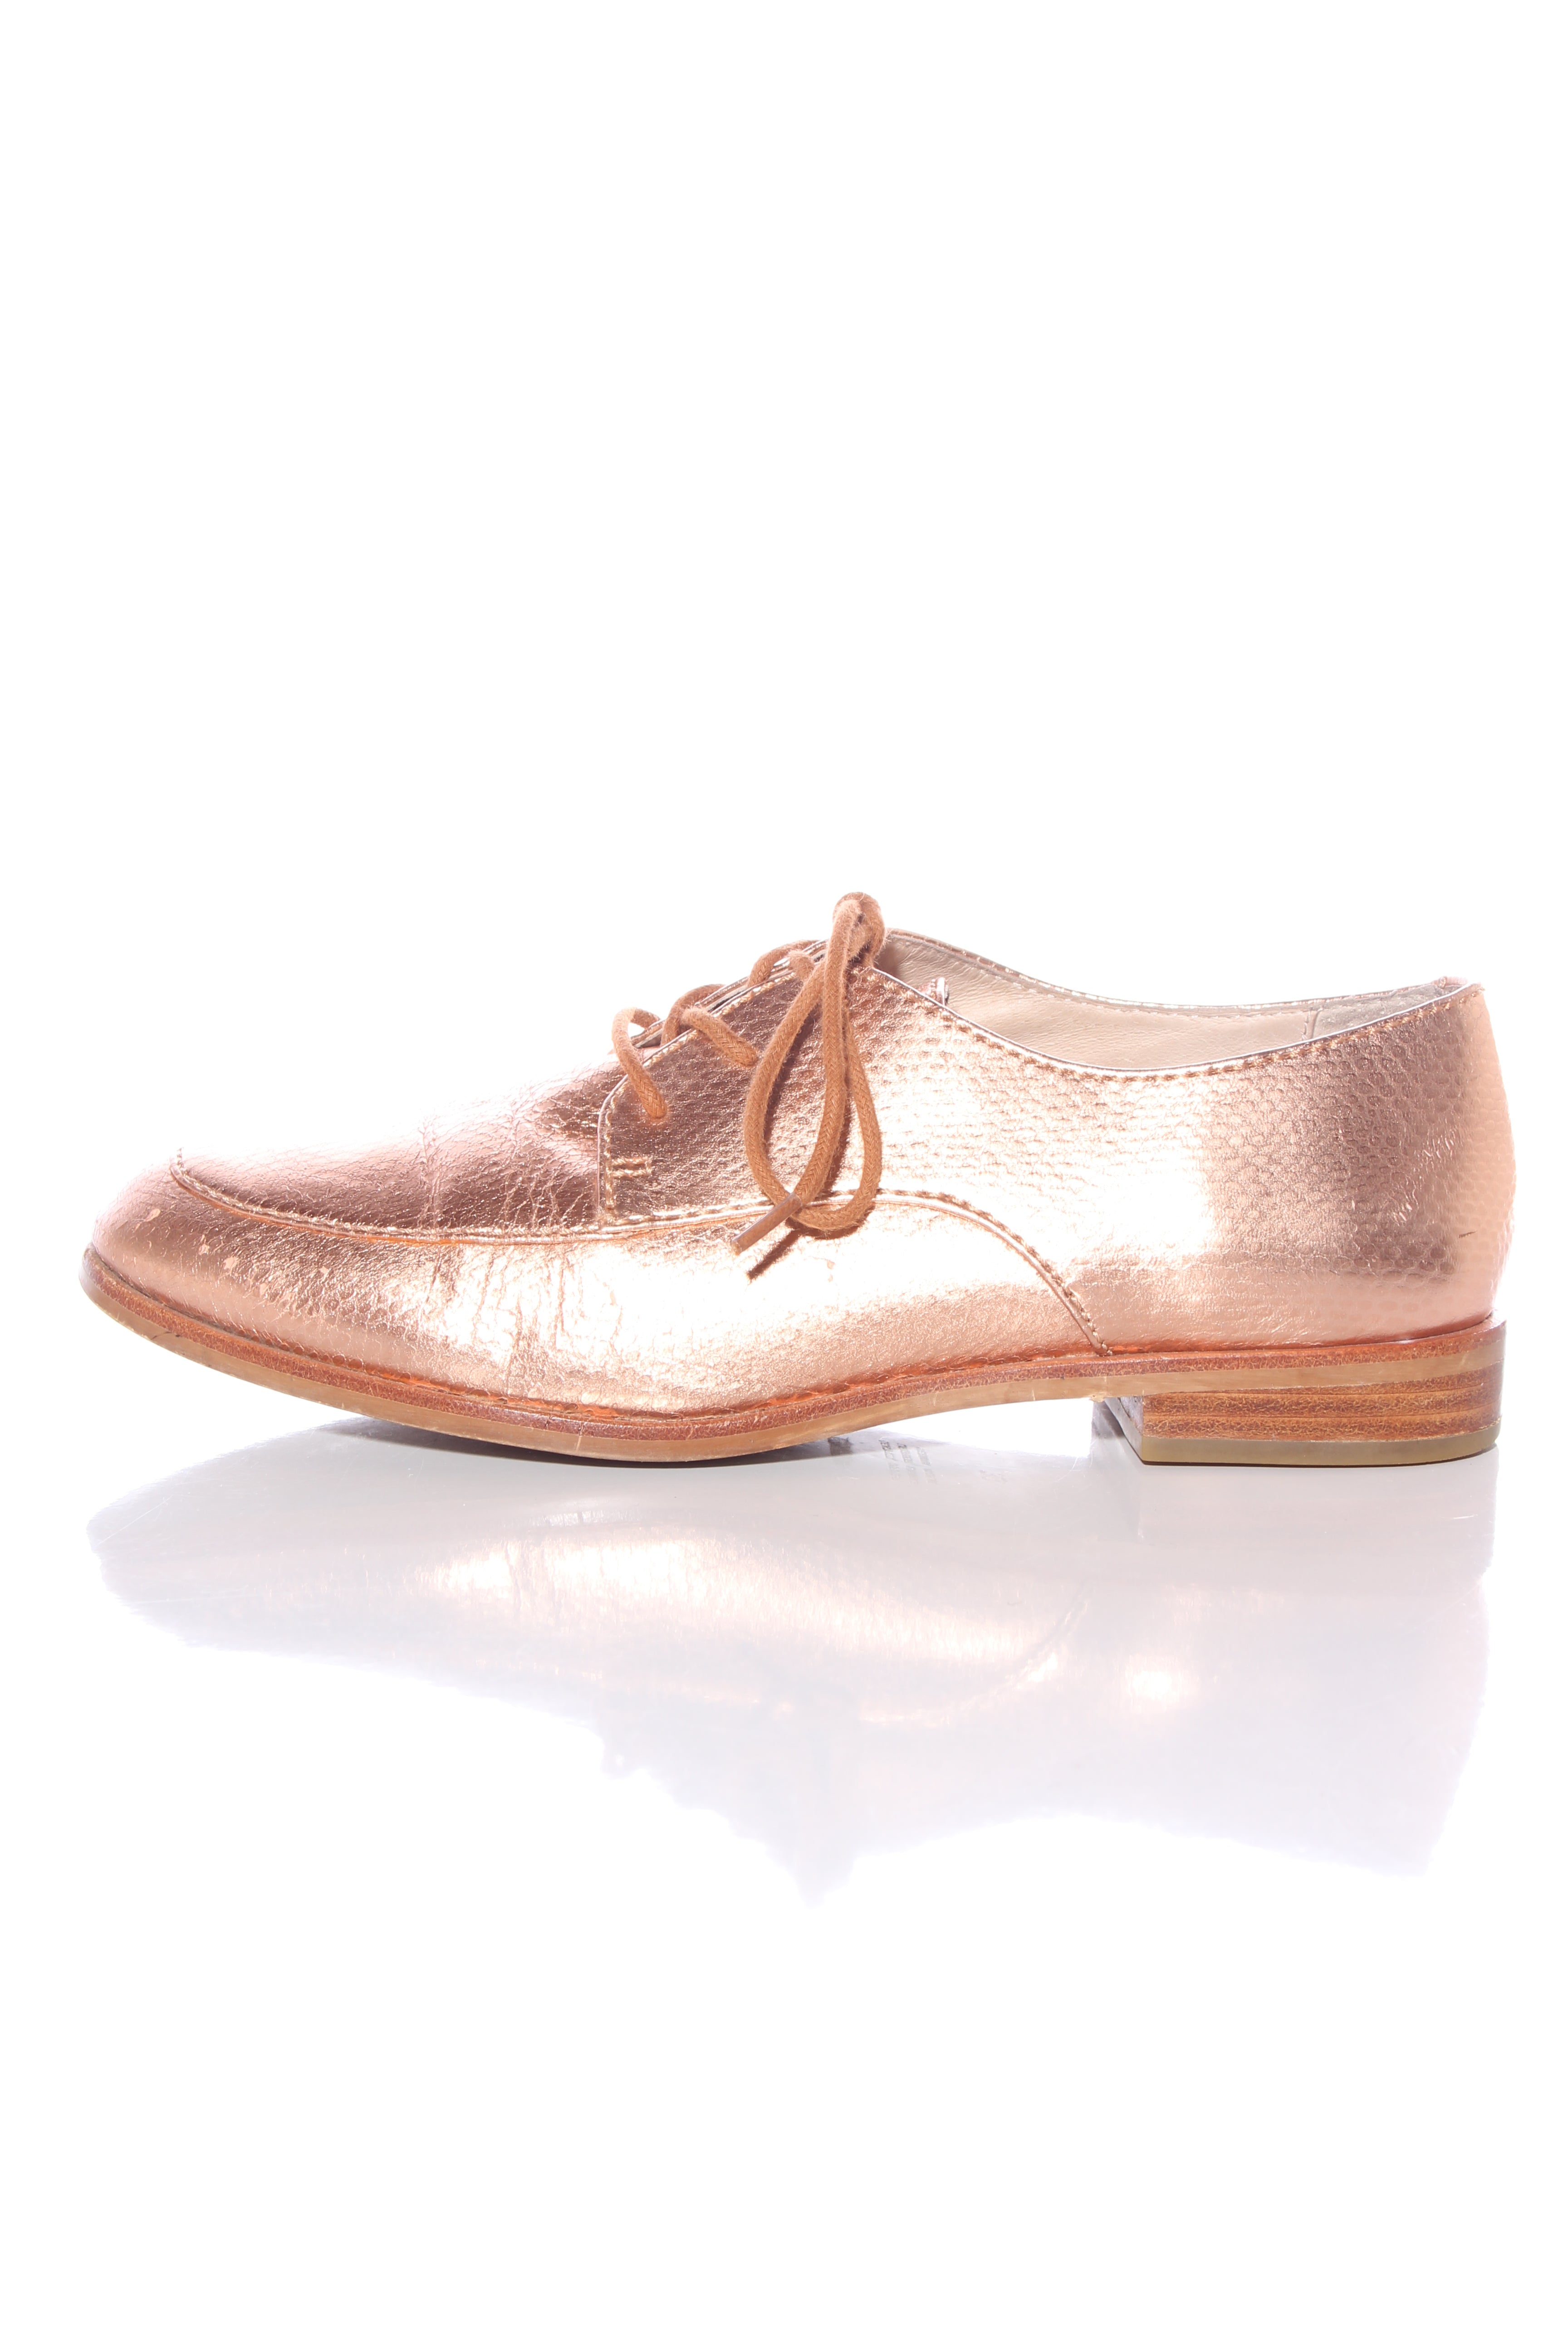 GORMAN - Rose gold leather shoes! 8 